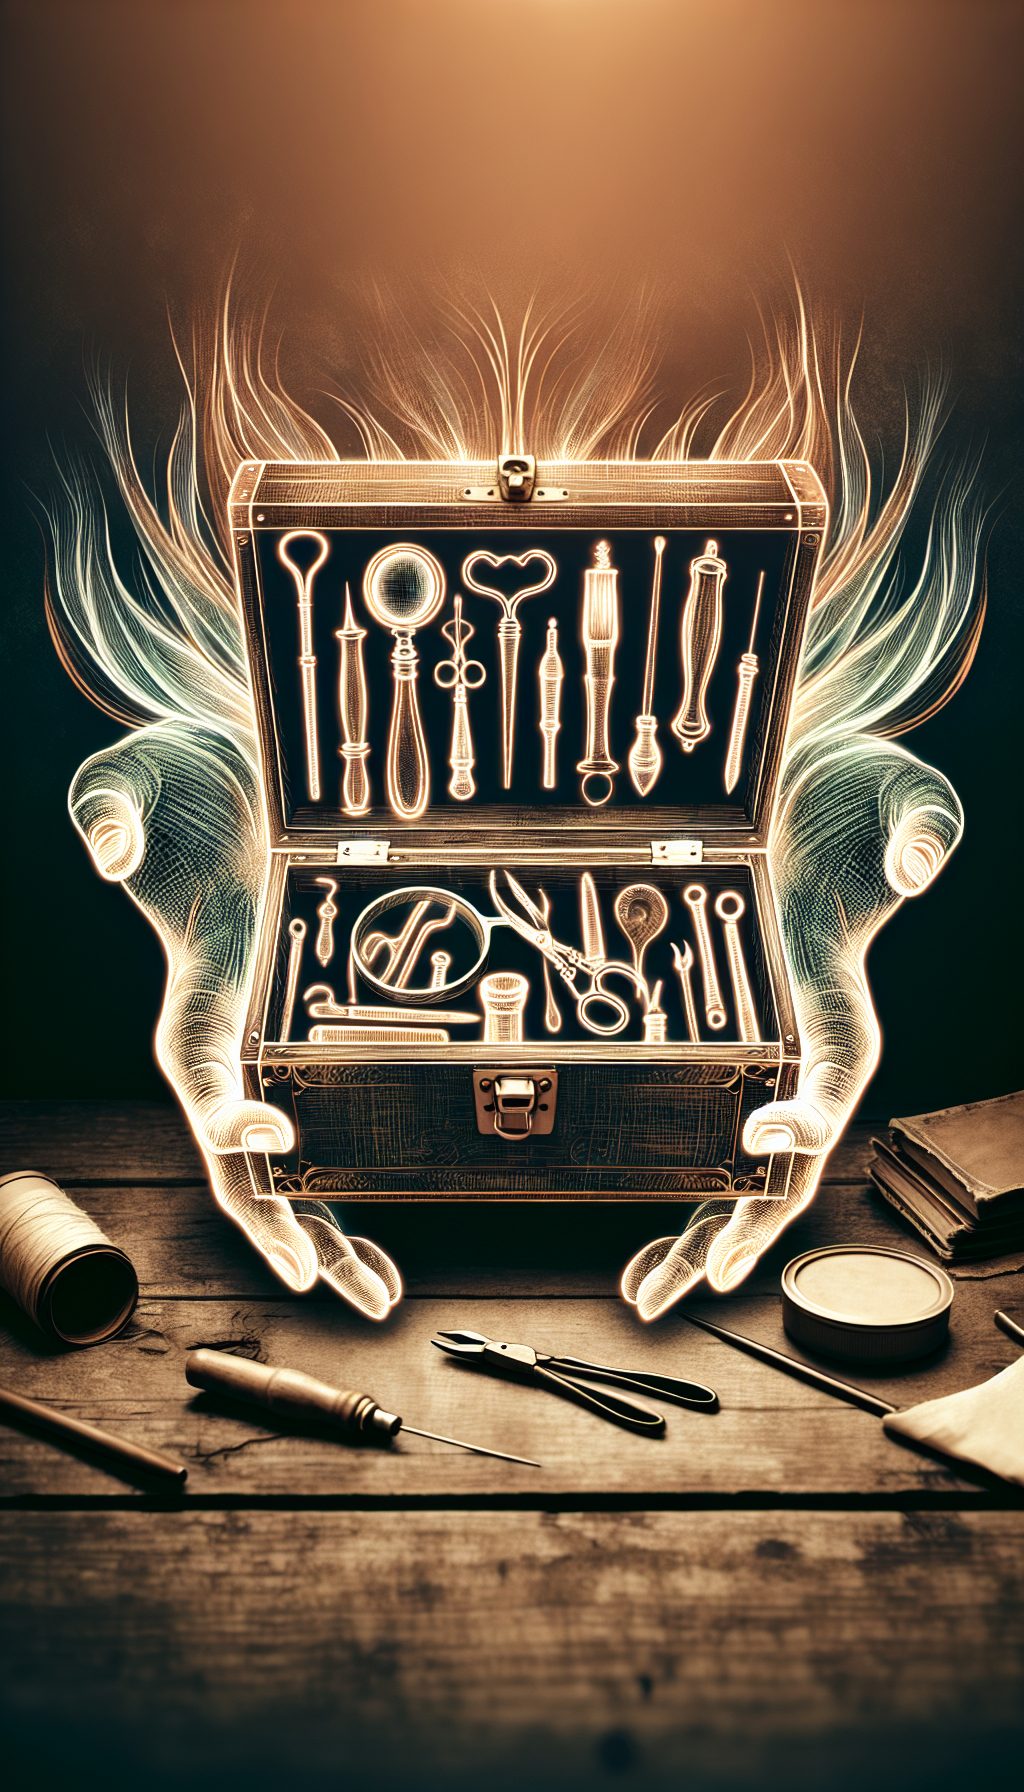 A sepia-toned illustration depicts an open, vintage toolbox with an array of antique tools inside, each with a glowing outline hinting at their unique history. A magnifying glass hovers over, symbolizing identification, while delicate, ethereal hands cradle the tools, illustrating the care and conservation aspect. The scene is set on an old workbench with scattered tool-care guides and preservation oils.